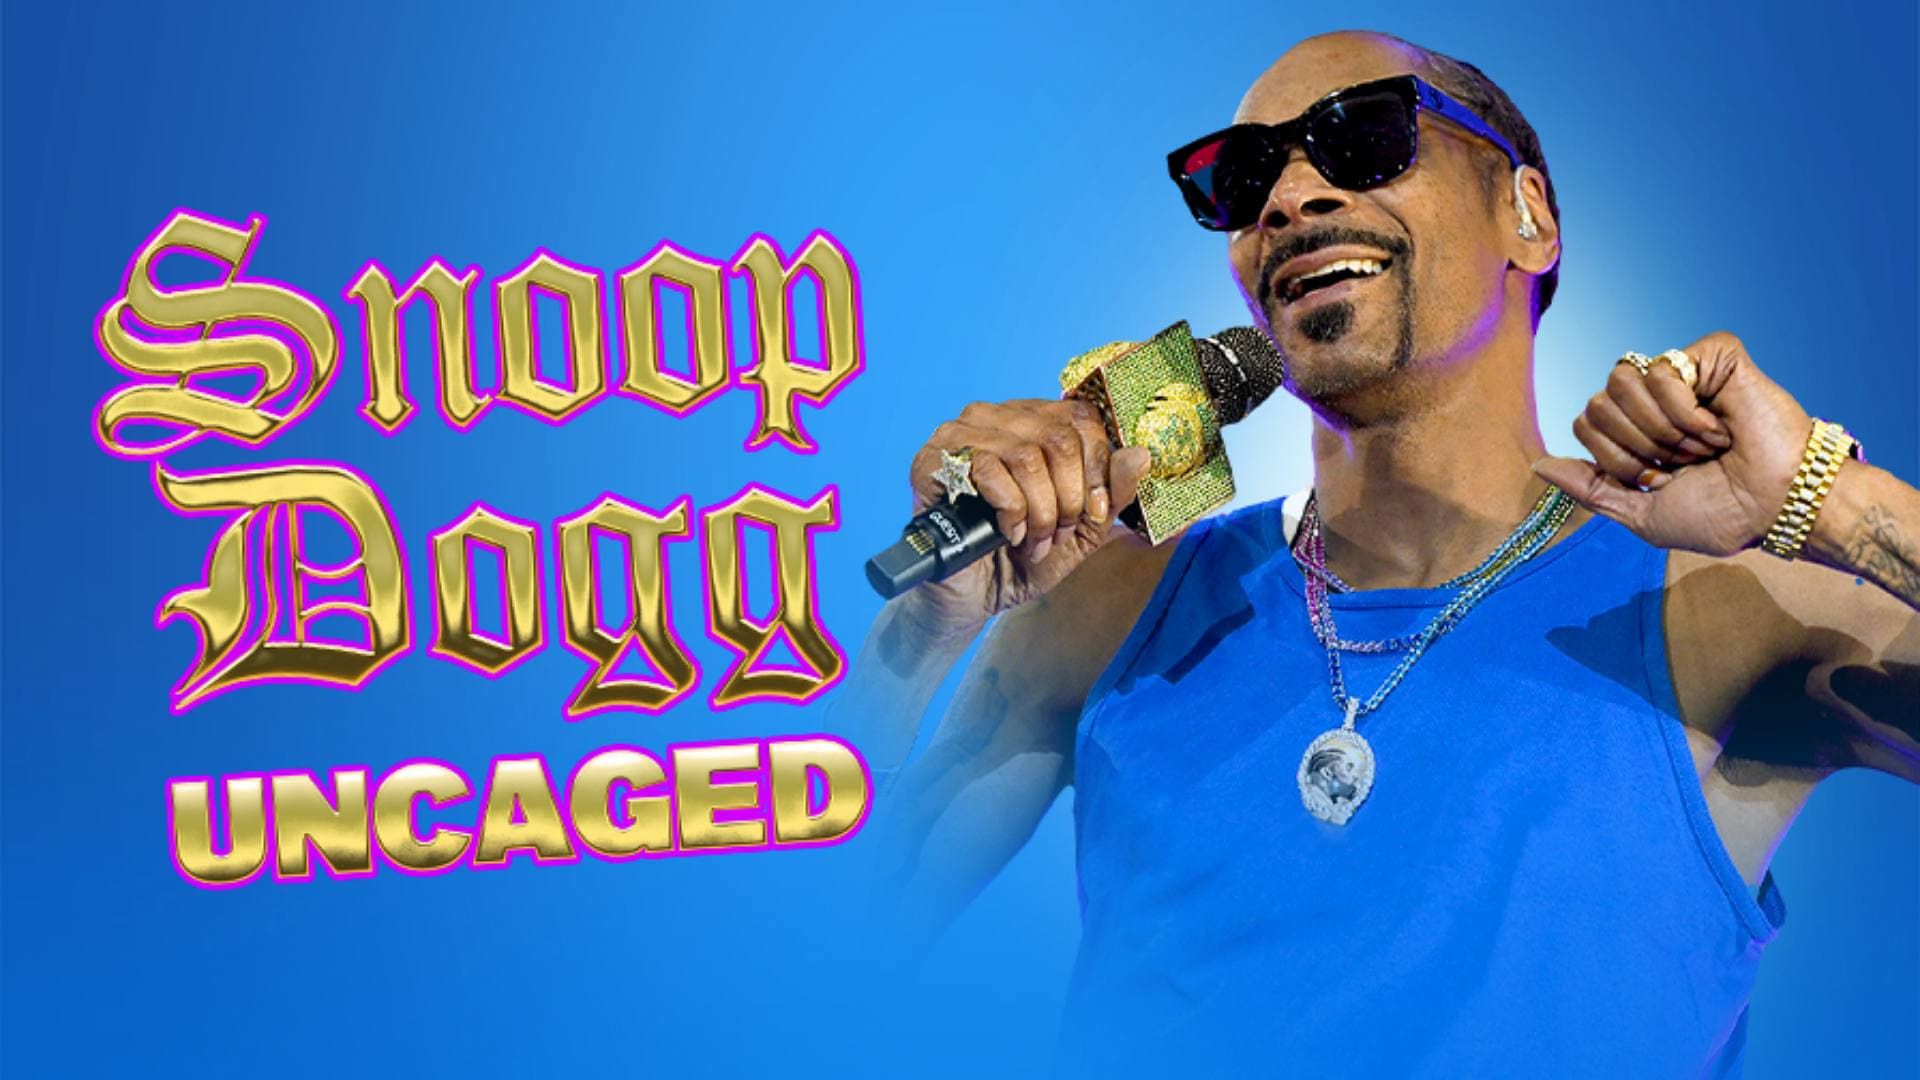 Snoop Dogg: Uncaged background